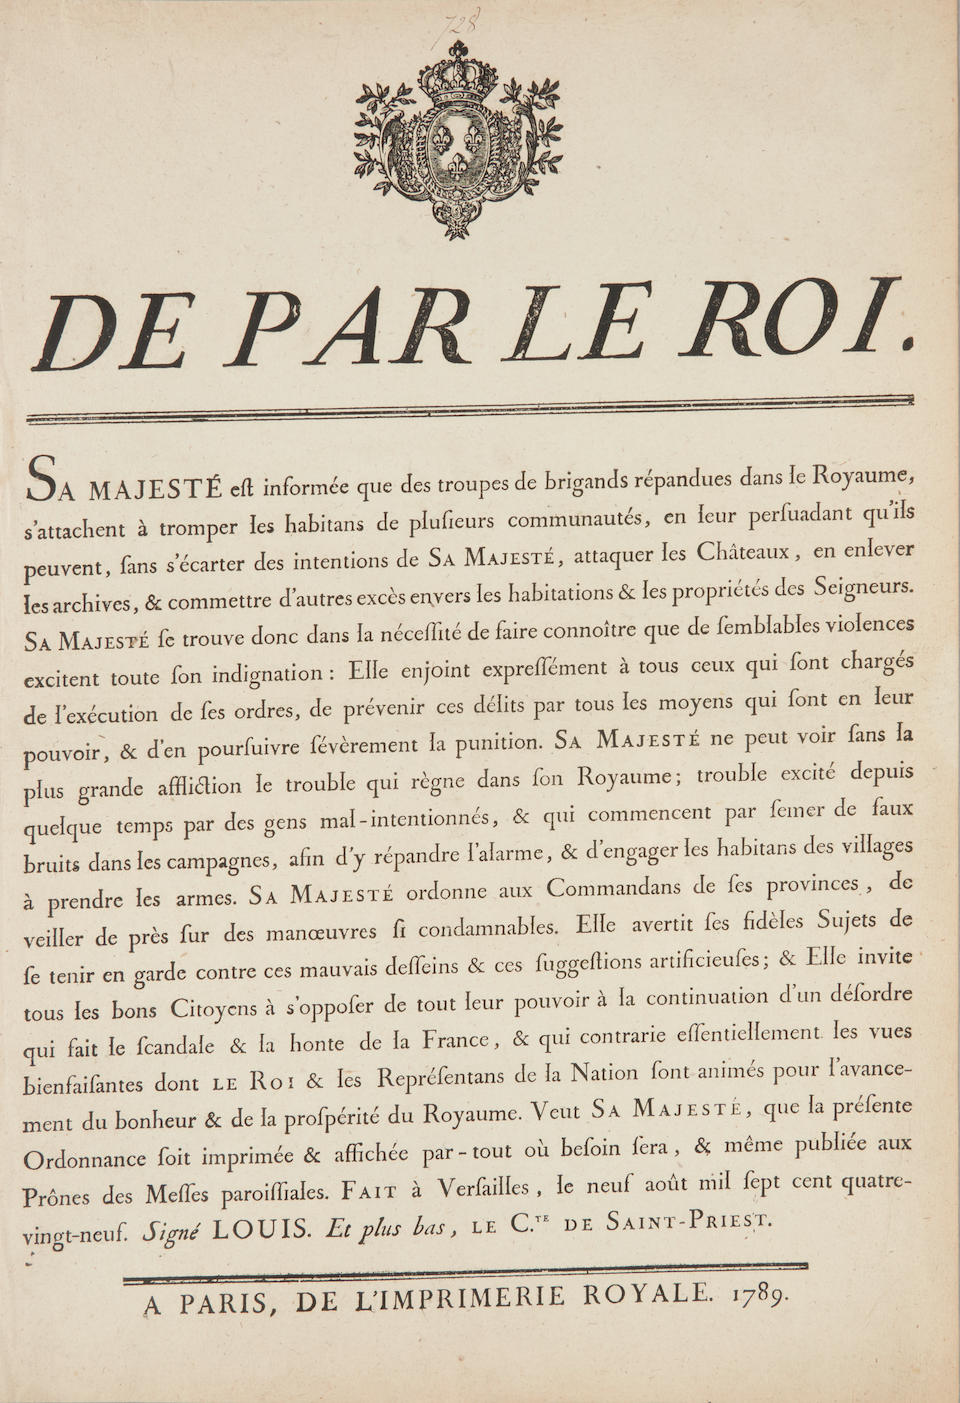 FRENCH ROYALTY. Proclamation by King Louis XVI, 1789.